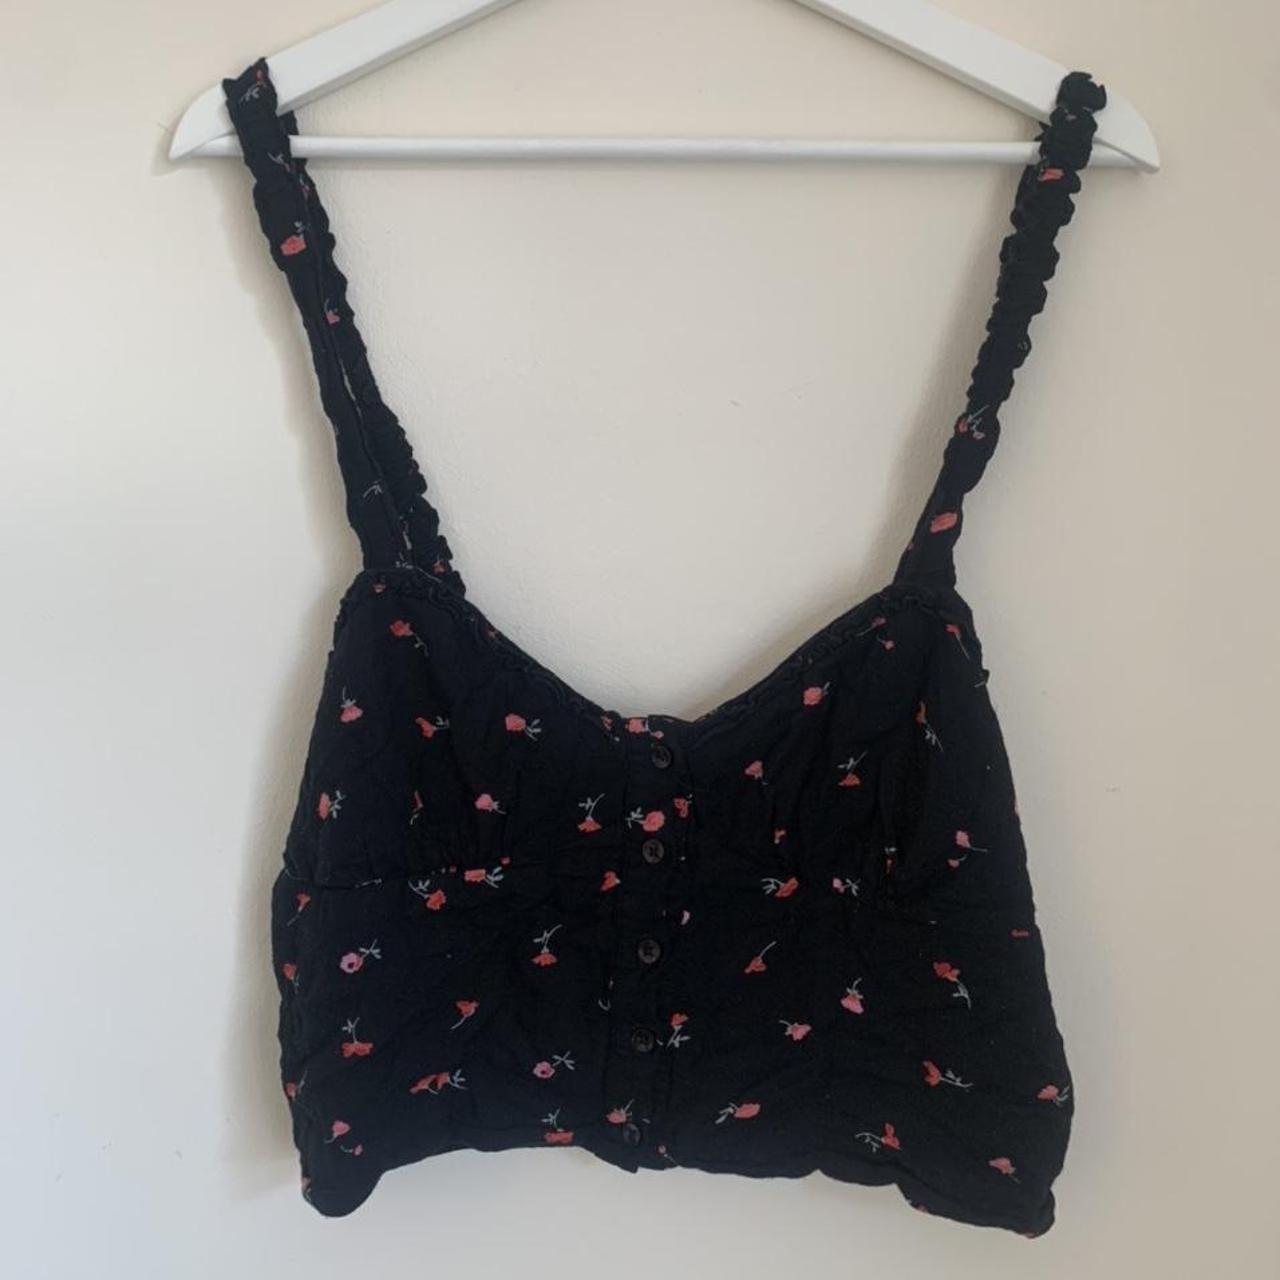 Urban outfitters corset style top. Fits bigger than... - Depop